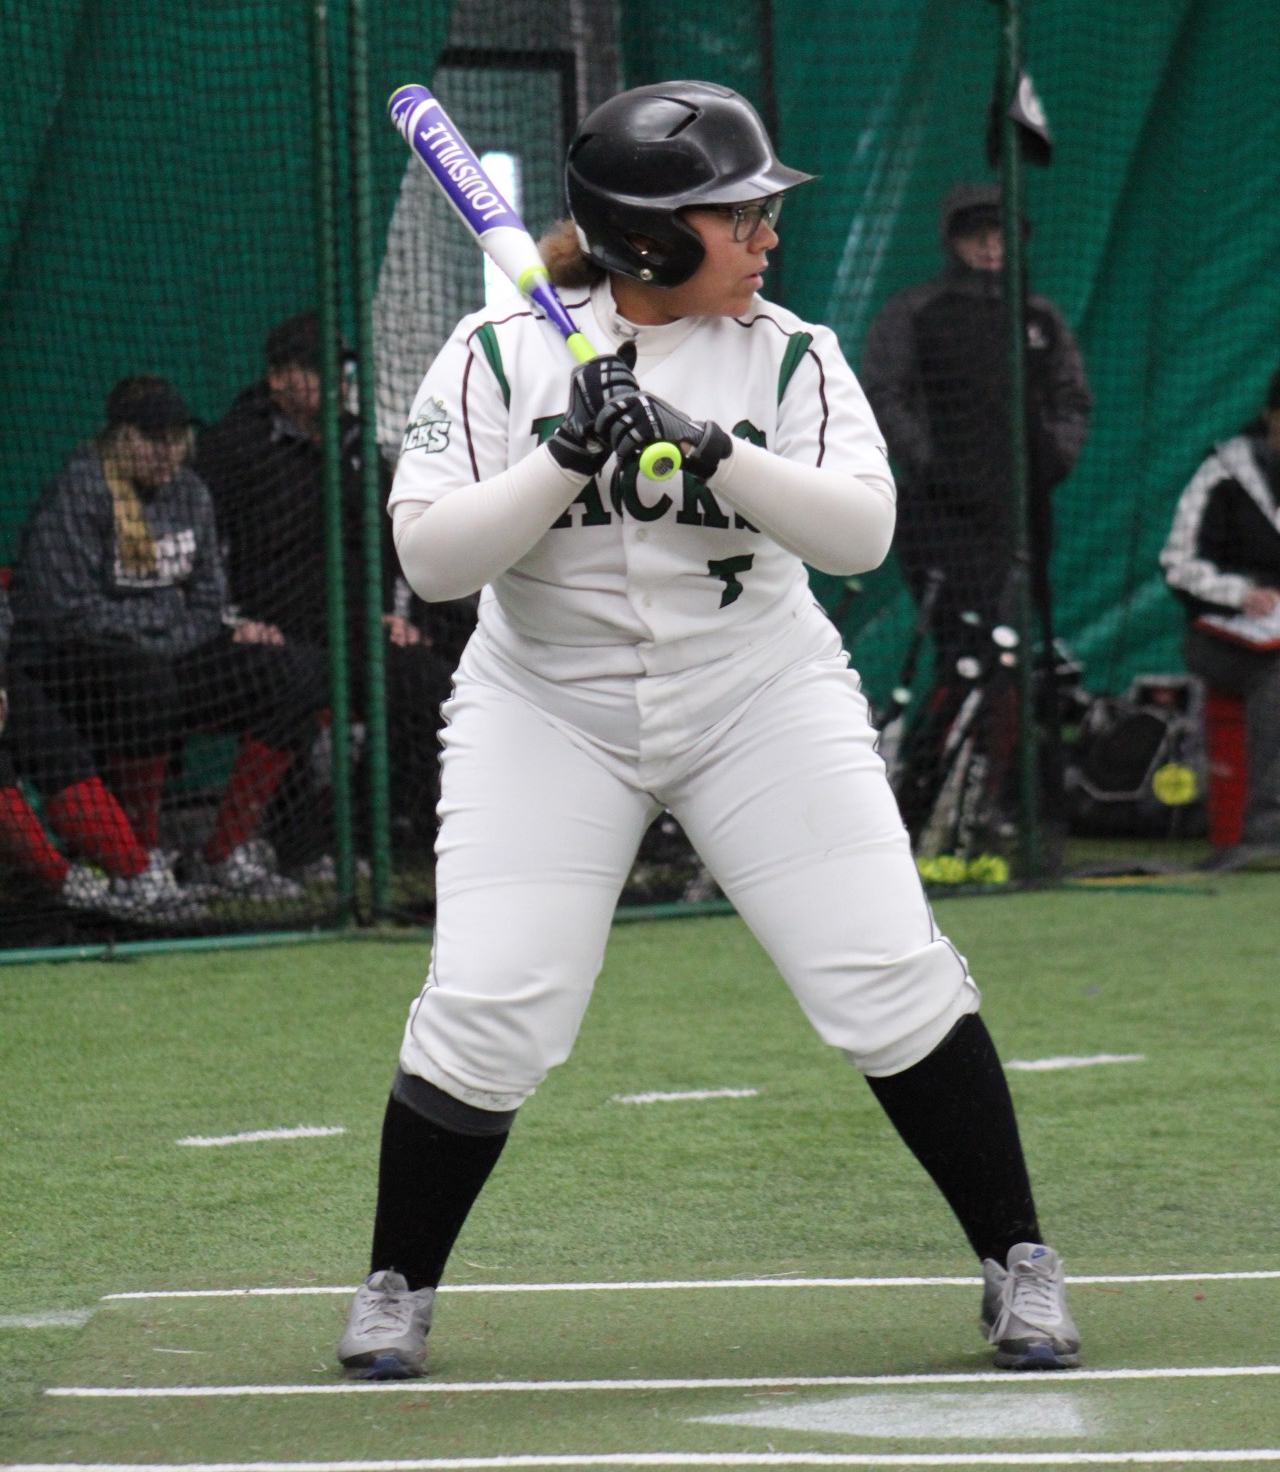 Freshman Ladaija Fitzgerald had a big opening weekend going 6 for 12 with 3 doubles, a triple, and 5 RBI.